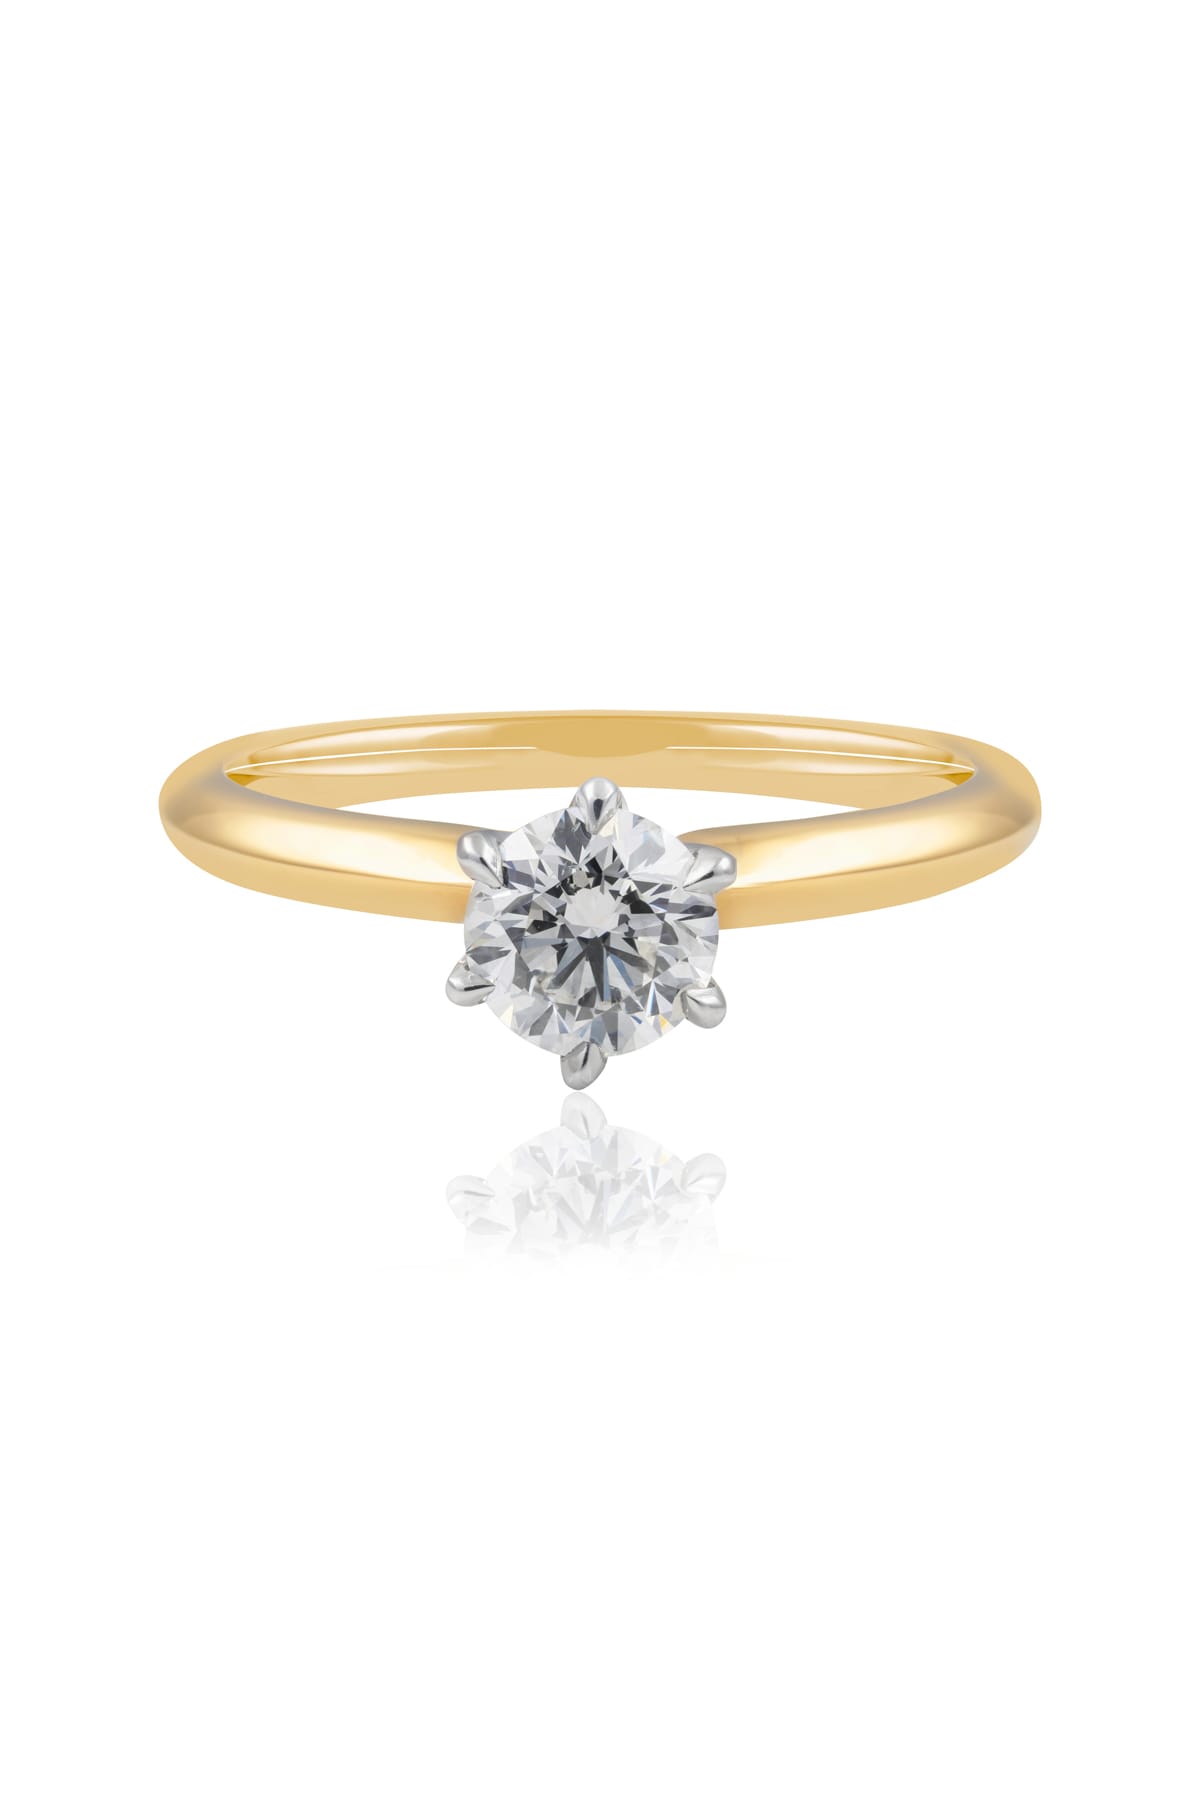 0.70ct Diamond Solitaire Engagement Ring With Knife Edge Setting In Yellow Gold from LeGassick Jewellery Gold Coast.